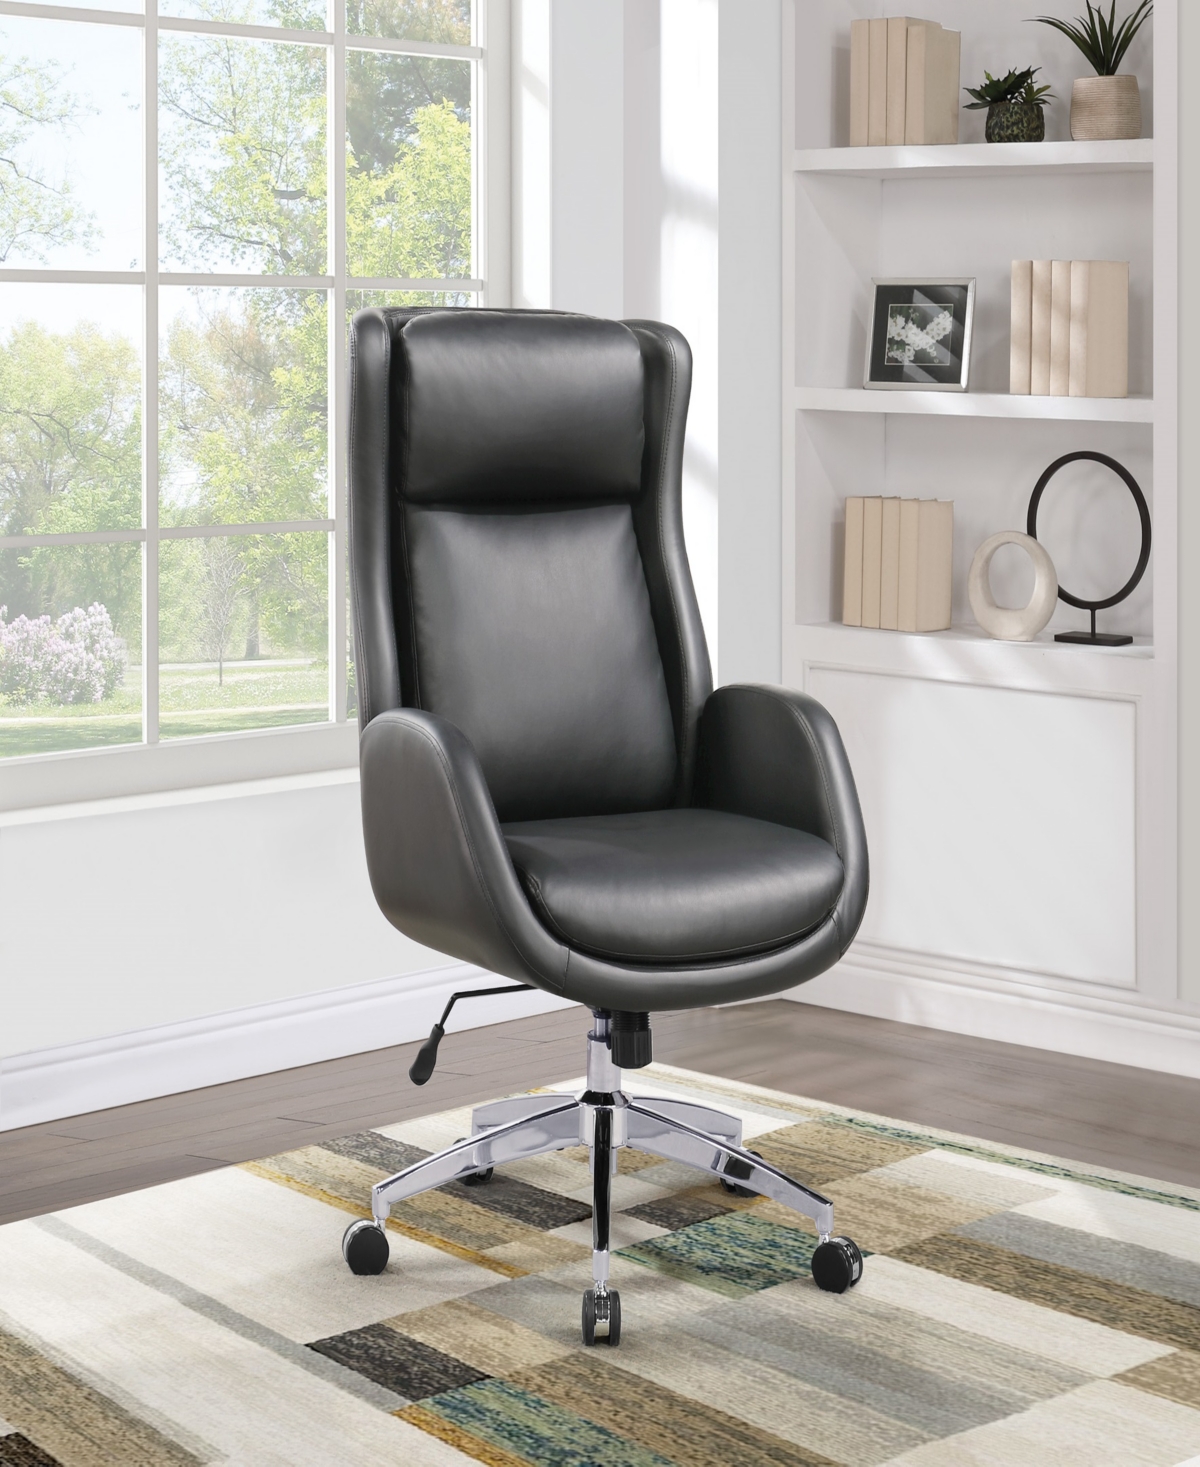 Osp Home Furnishings Office Star Blanchard Office Chair In Black Leatherette Upholstery